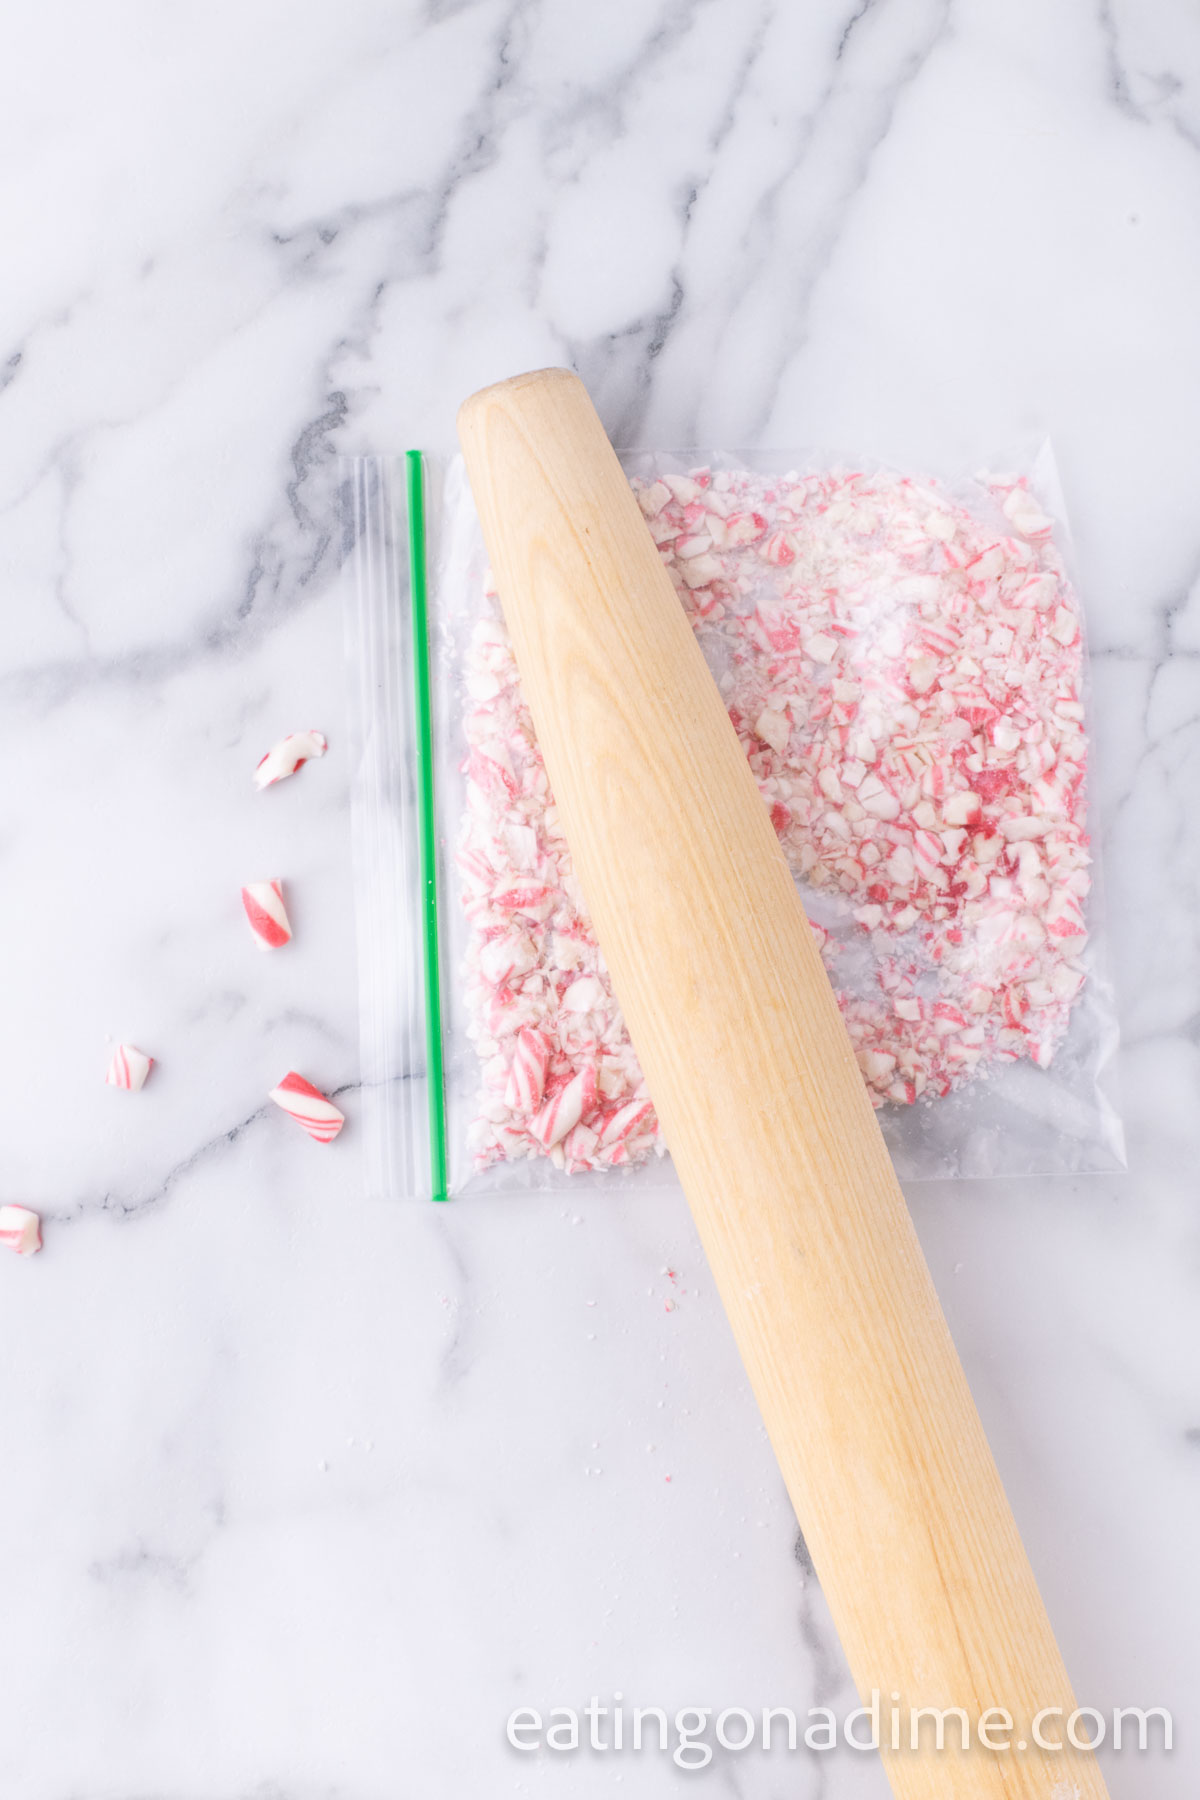 Crushing the Peppermint Candies with rolling pin a zip loc bag